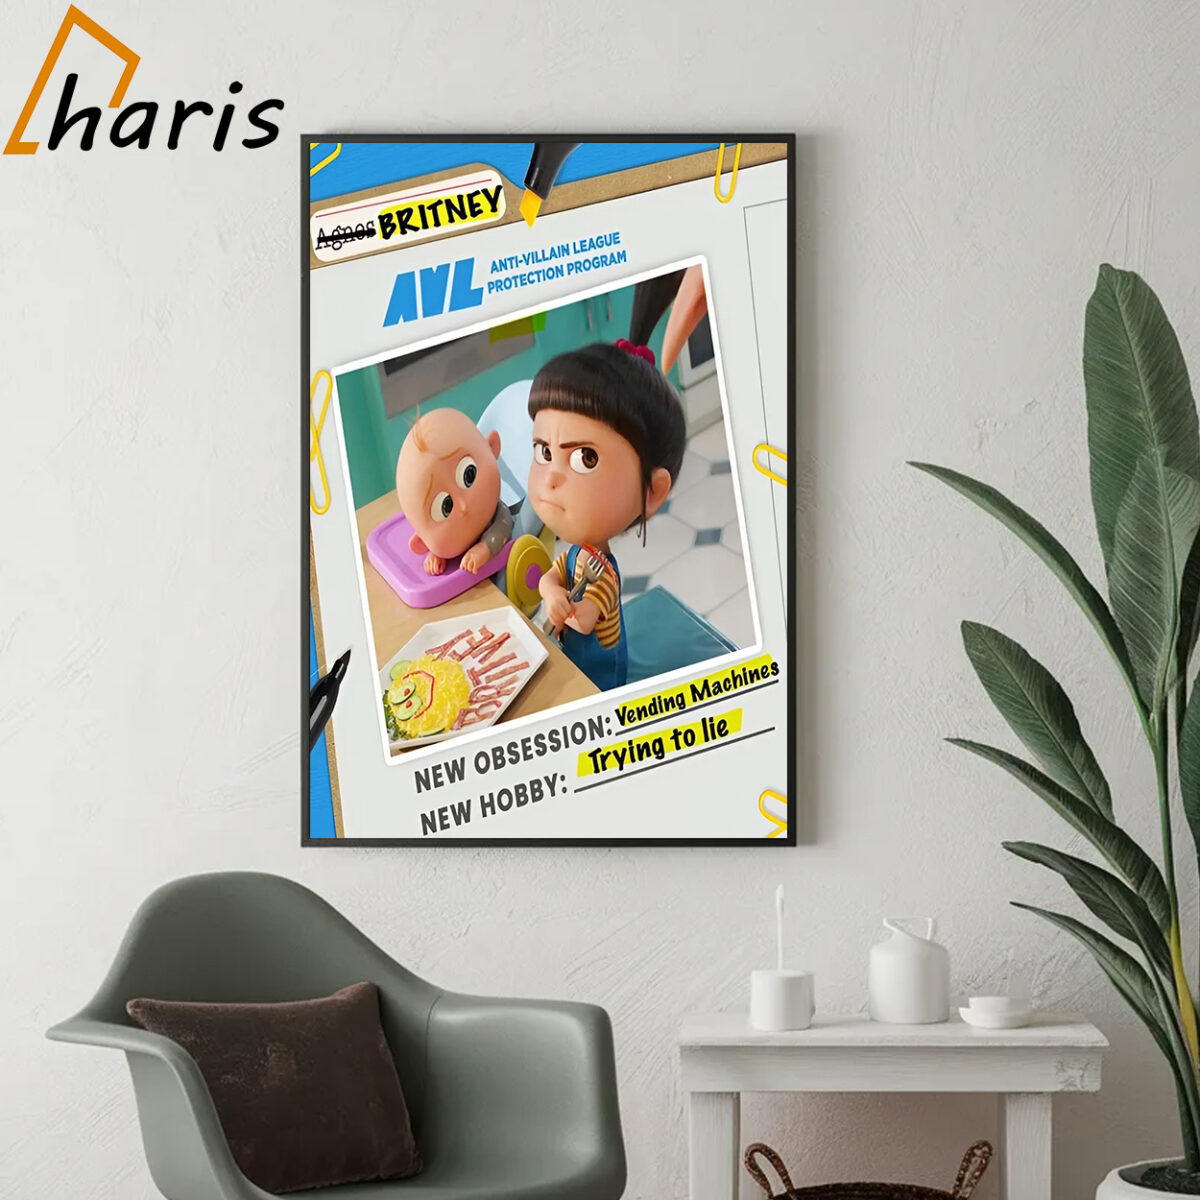 Despicable Me 4 Agnes As Britney Her Name Has Always Been Britney AVL New Dos Referral Poster